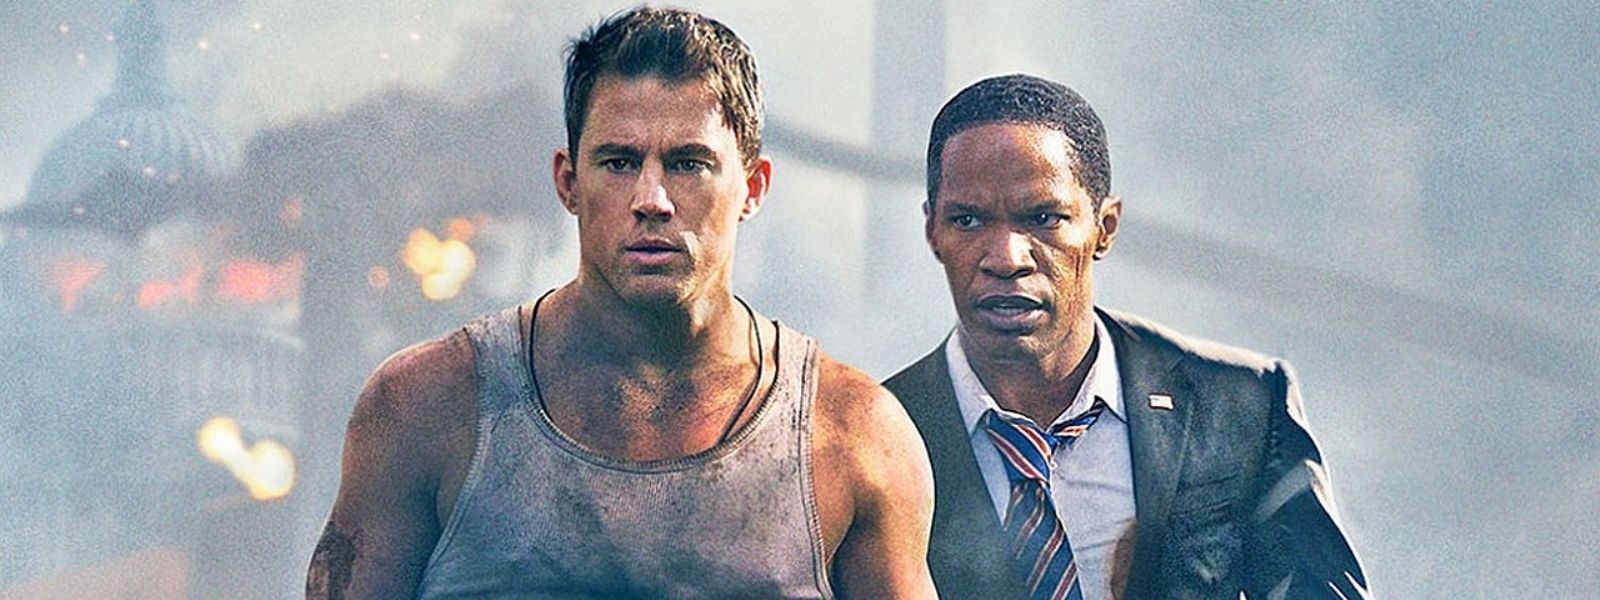 White House Down Review